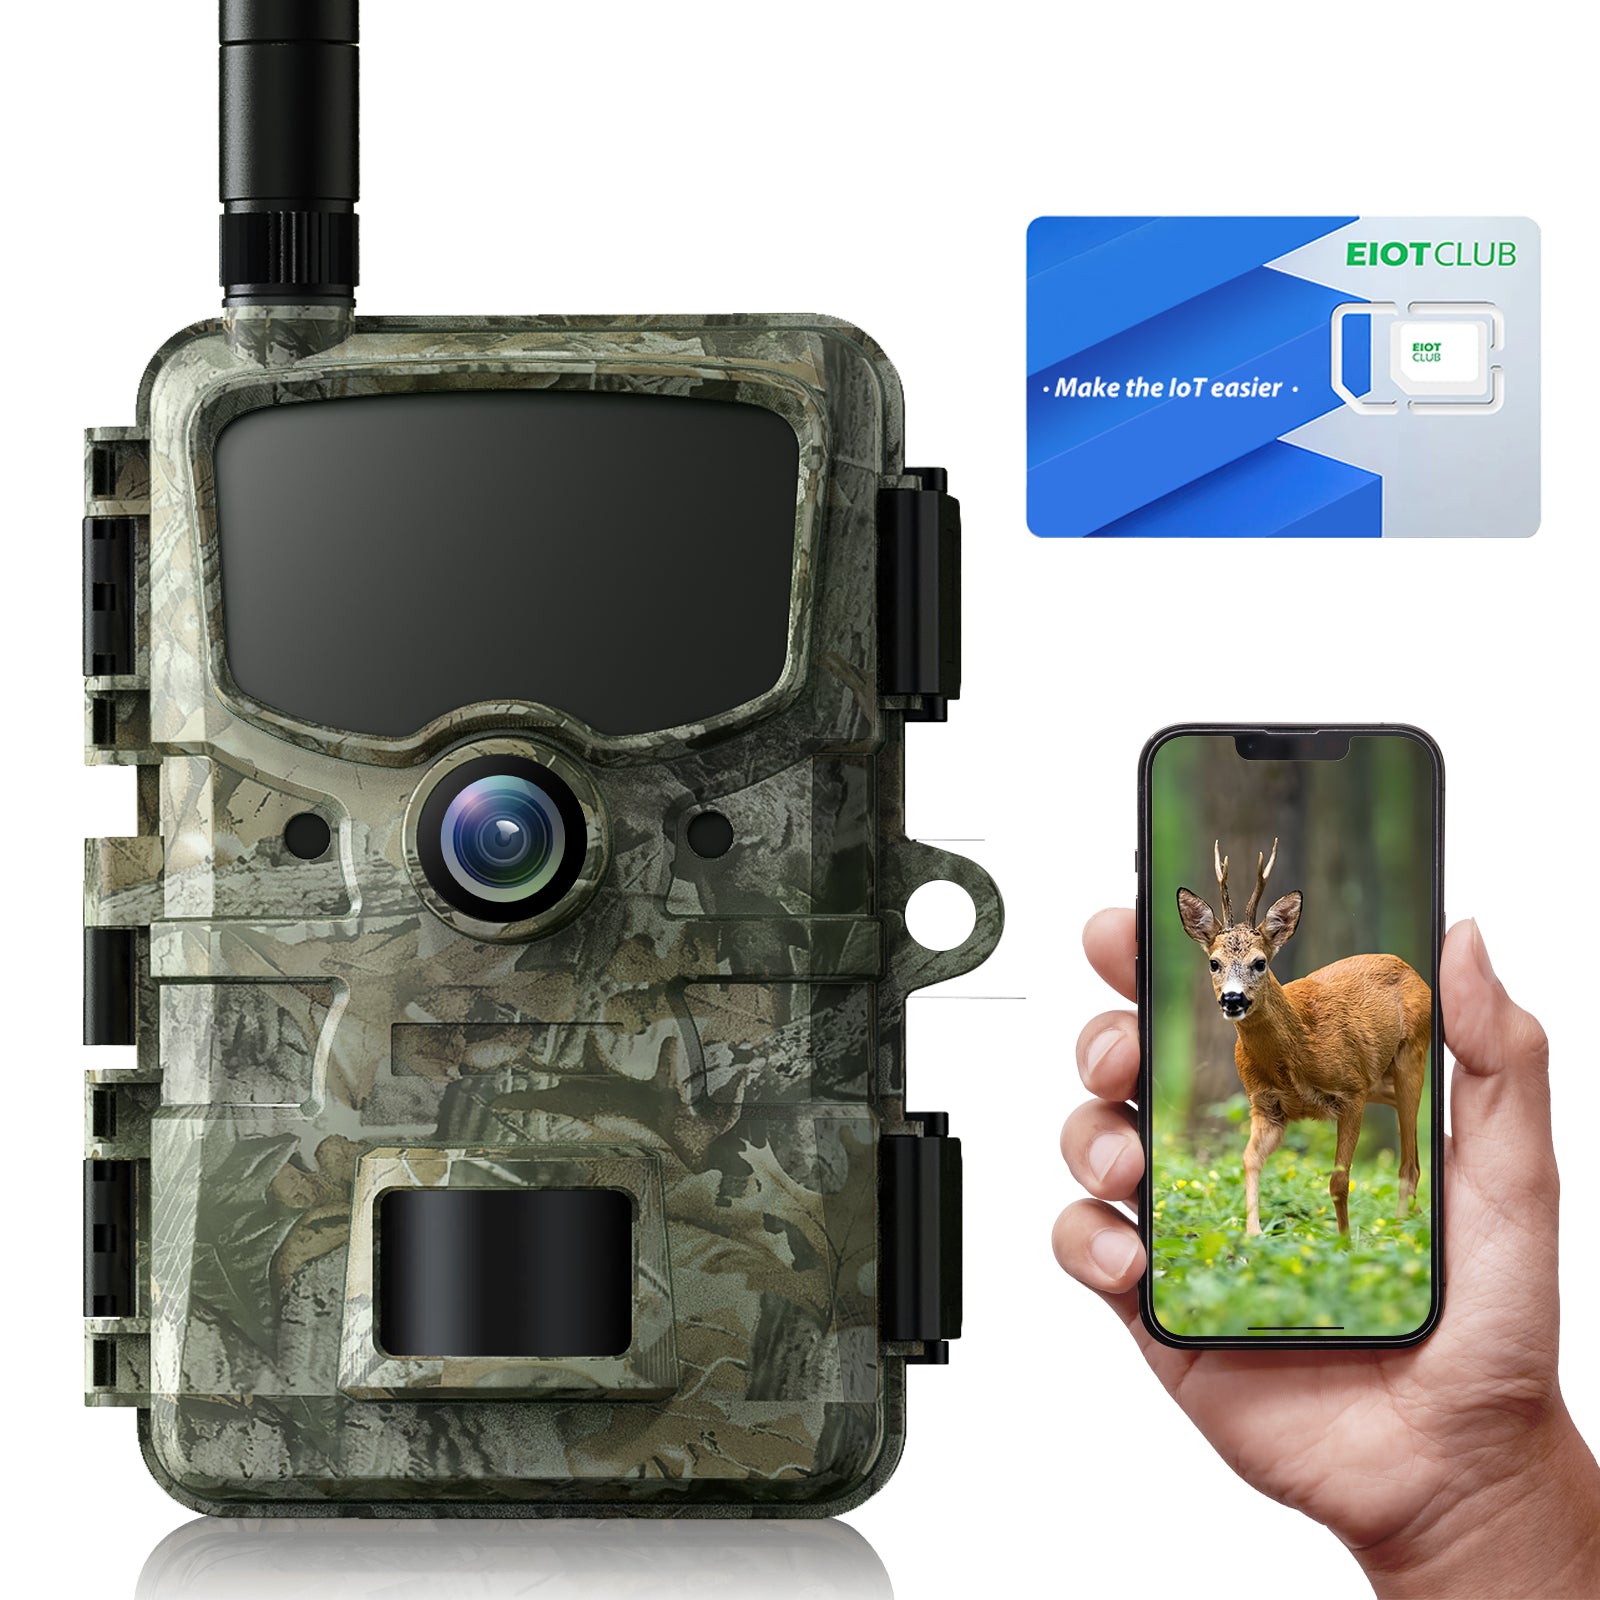  4G LTE Cellular Trail Camera Wireless View Outdoor Game Camera